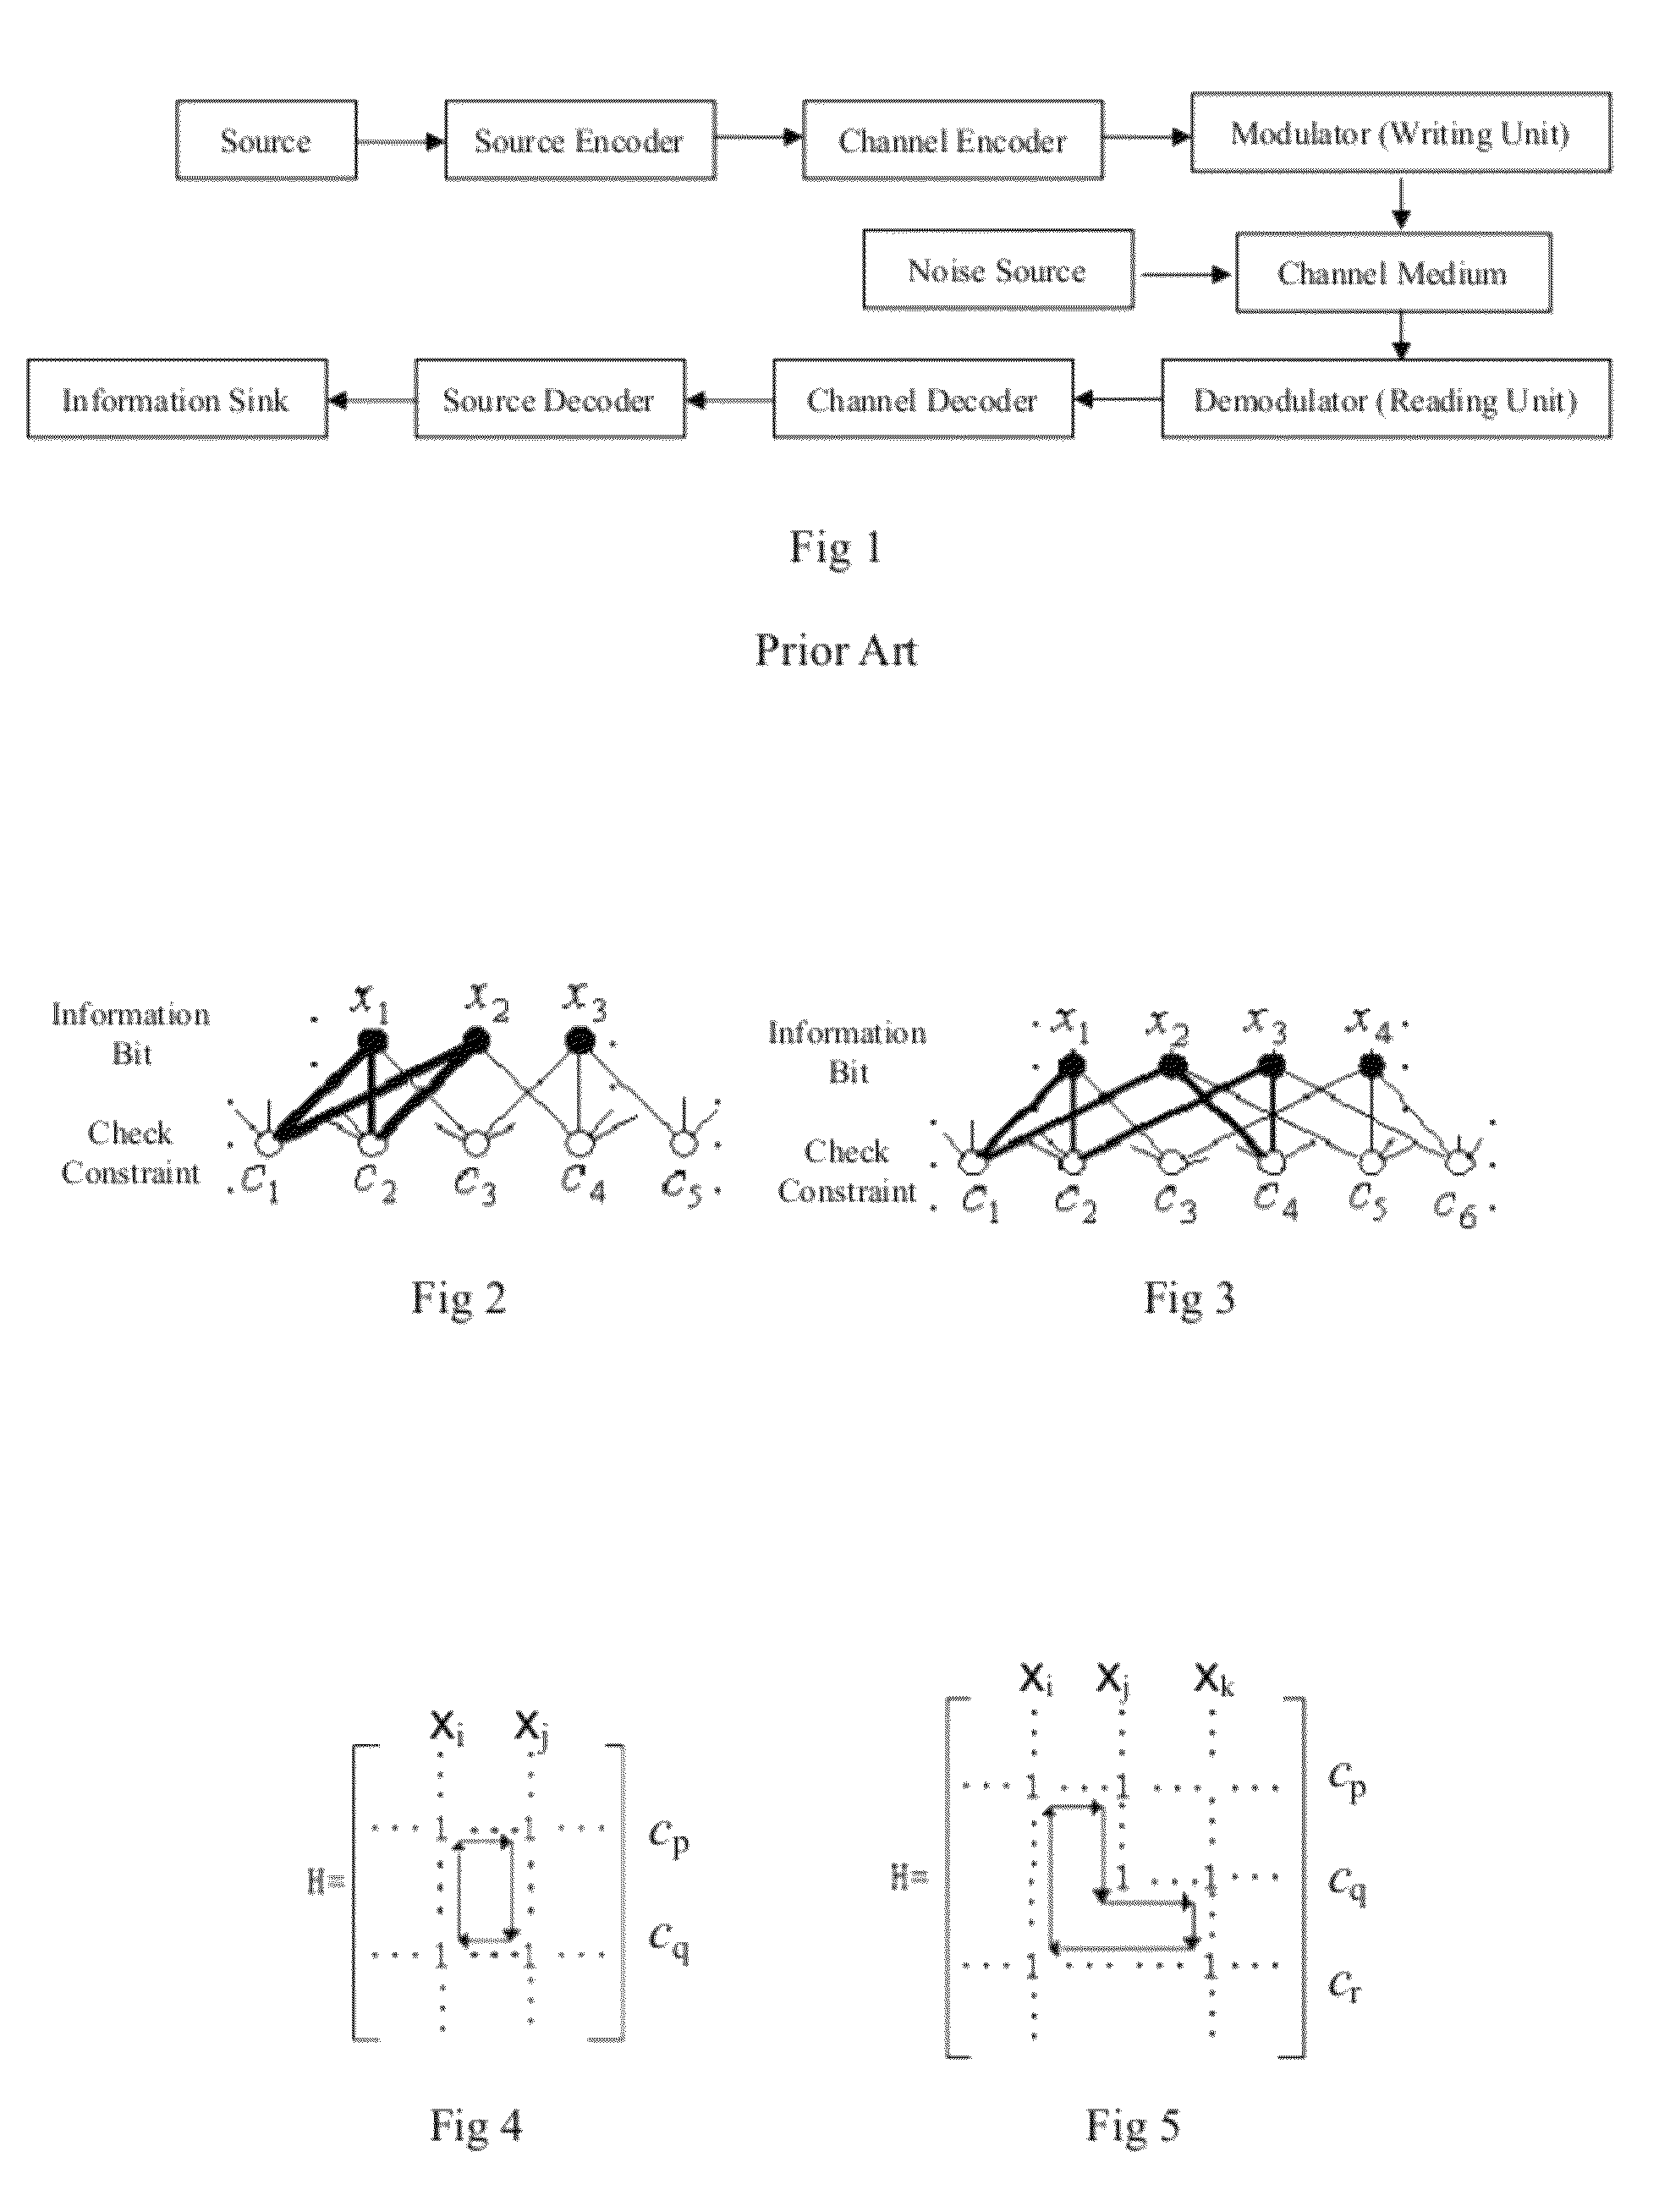 Basic matrix, coder/encoder and generation method of the low density parity check codes